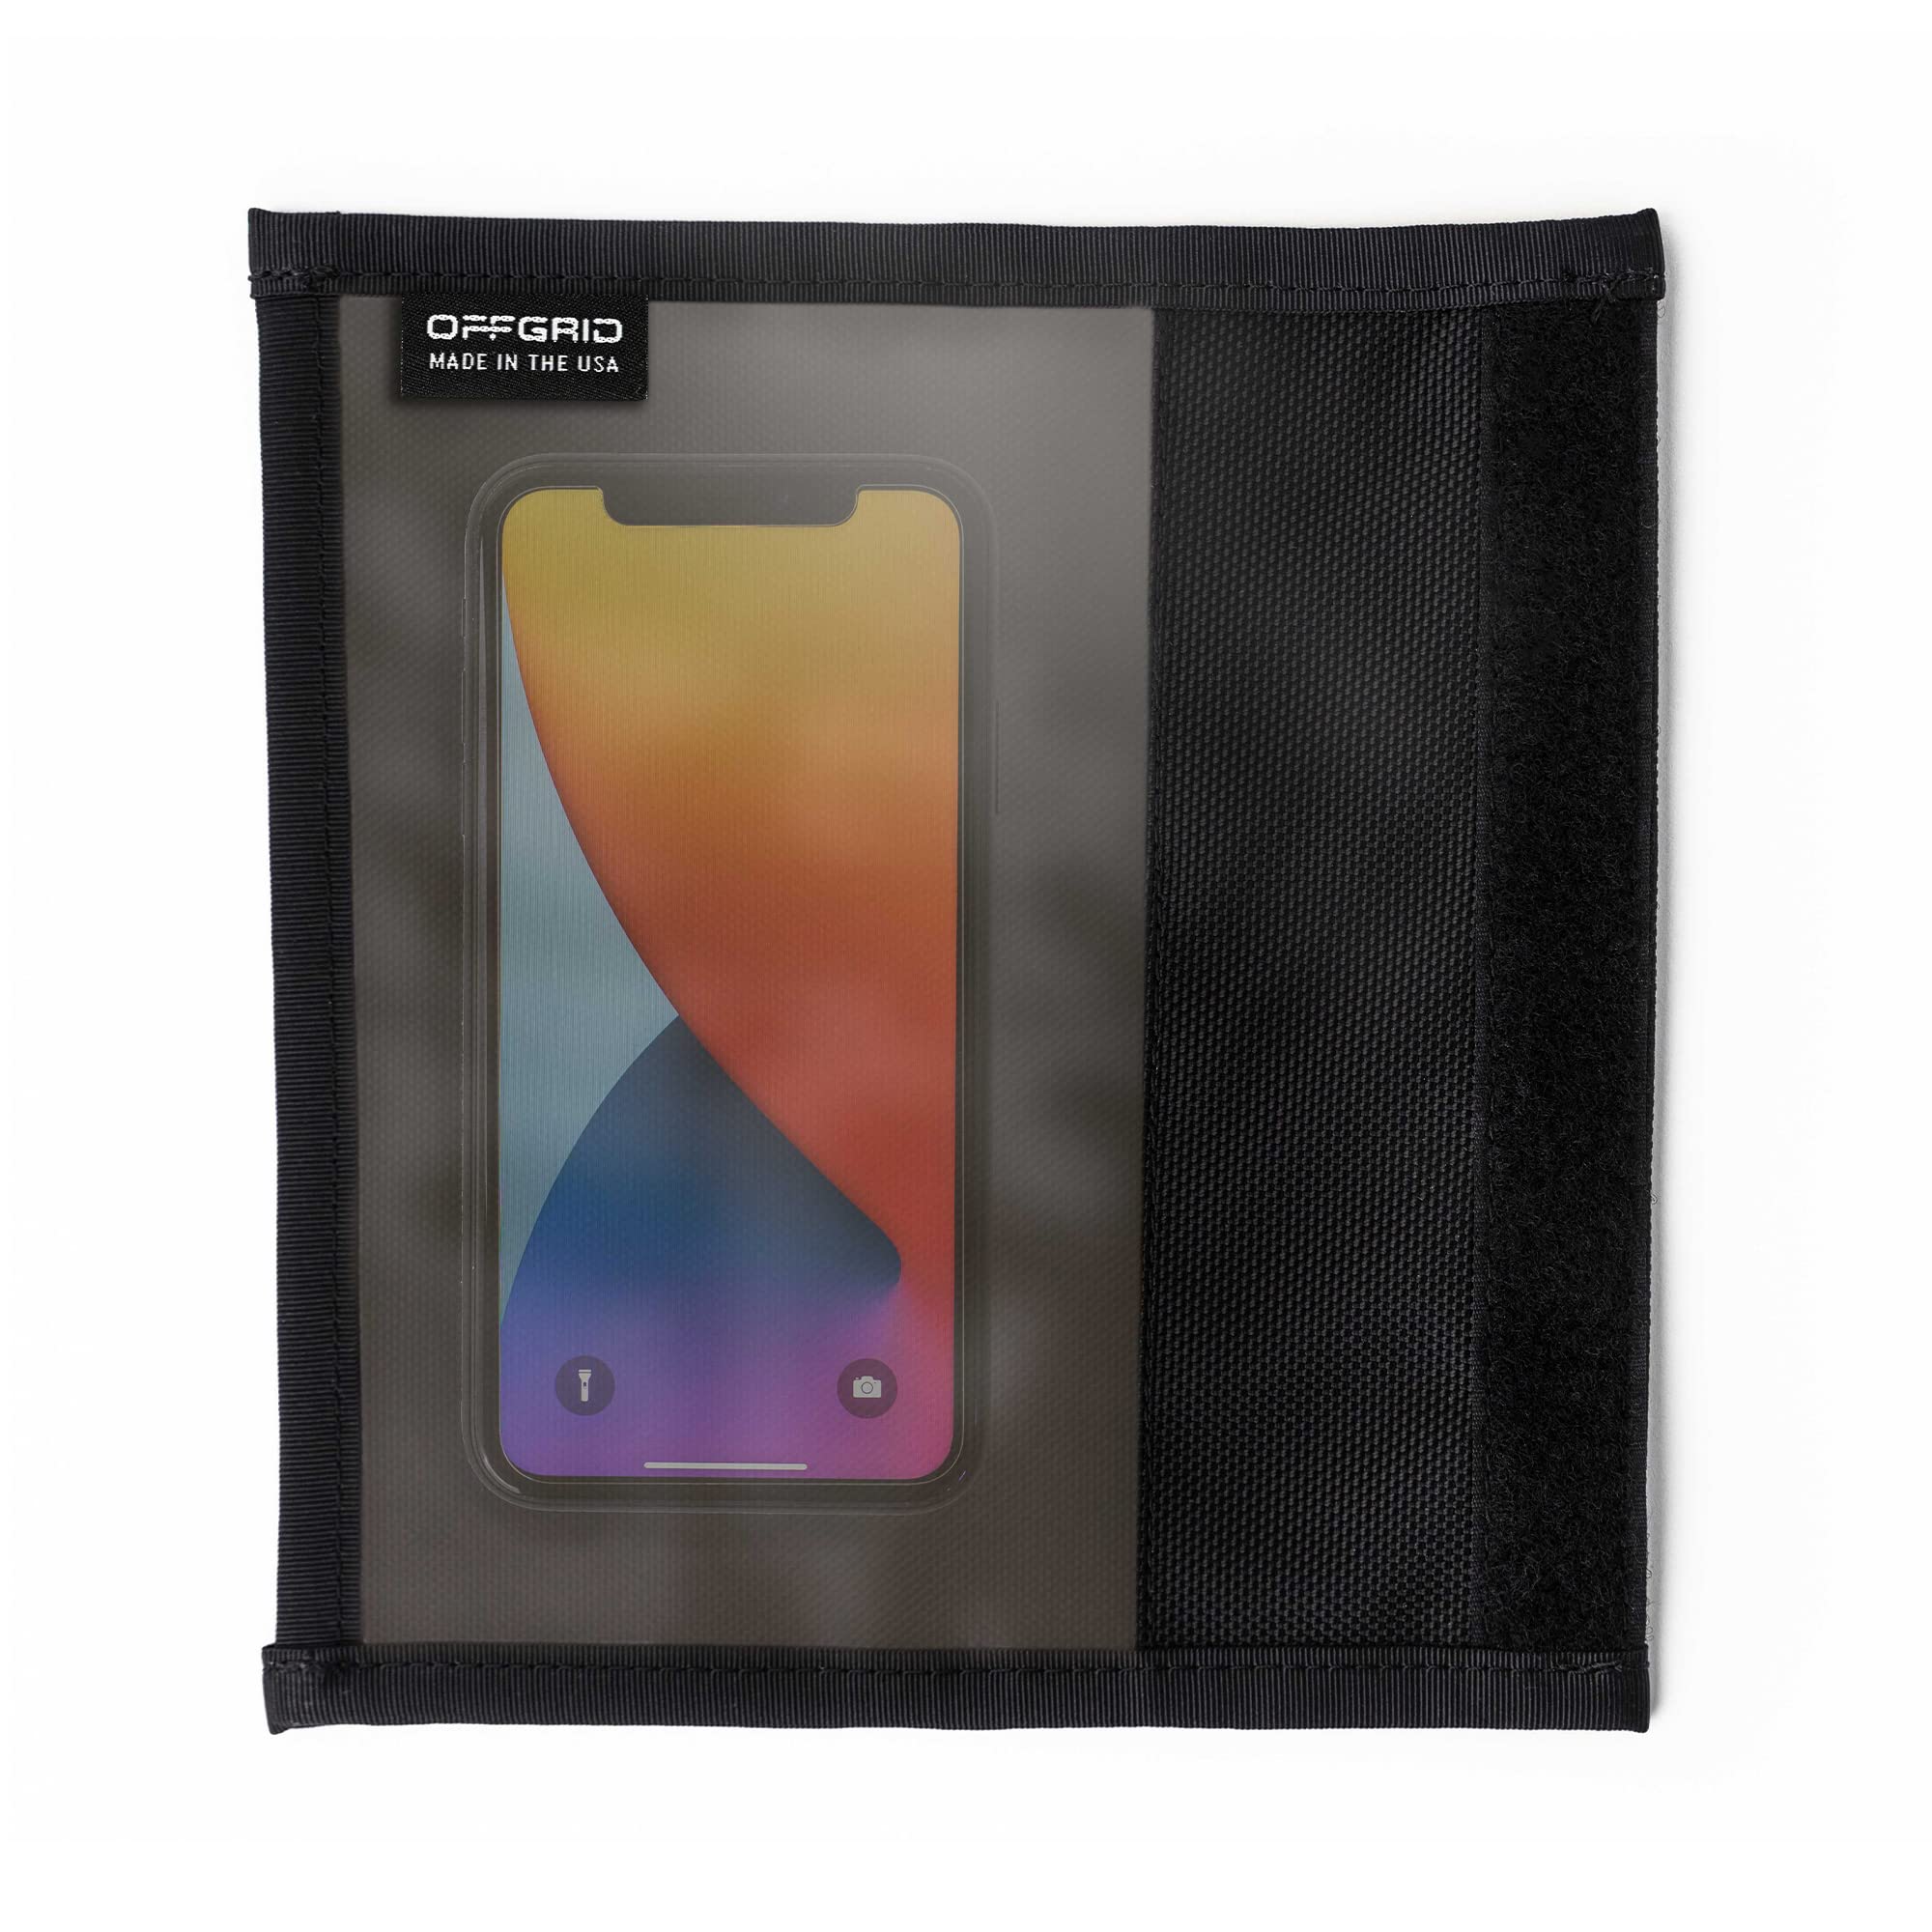 OFFGRID by EDEC - Cell Phone Faraday Bag with Window - Signal Blocking, Anti-tracking, Anti-spying, EMP Protection for Cell Phones, Key Fobs and Credit Cards